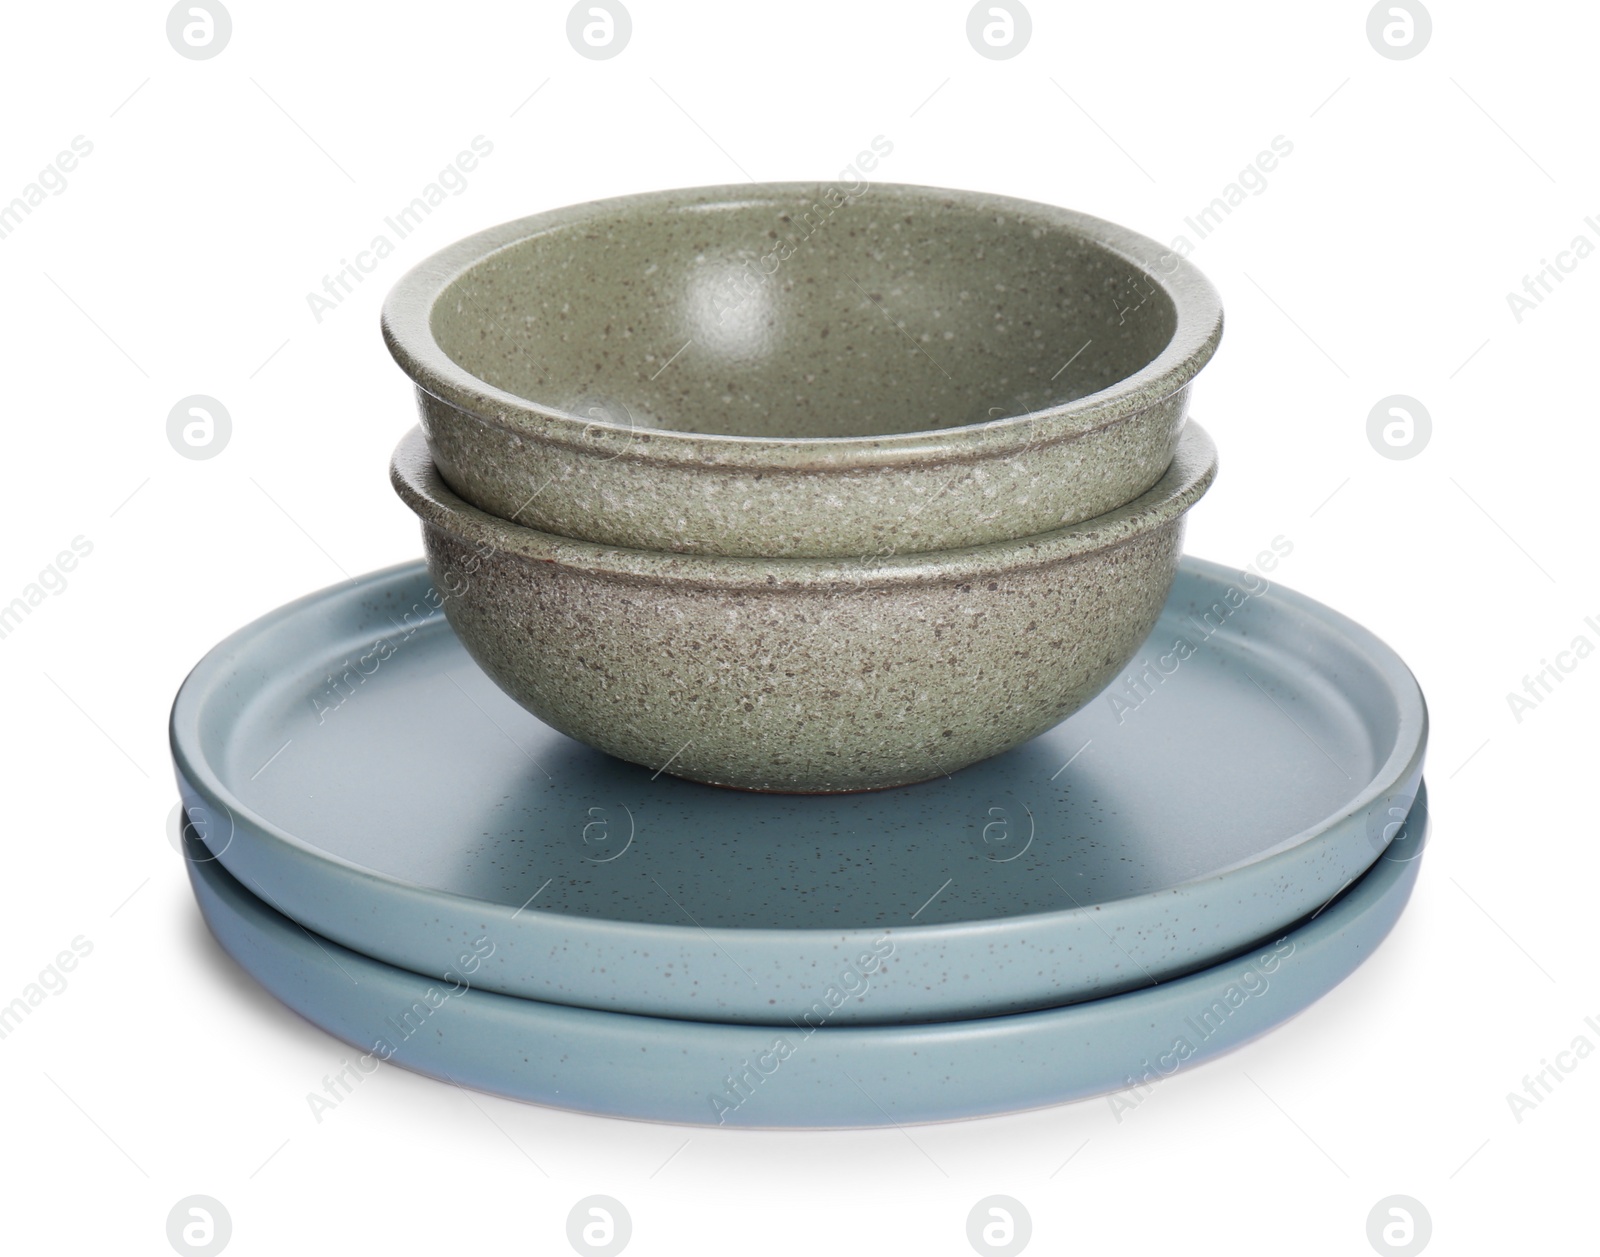 Photo of Grey ceramic plates and bowls on white background